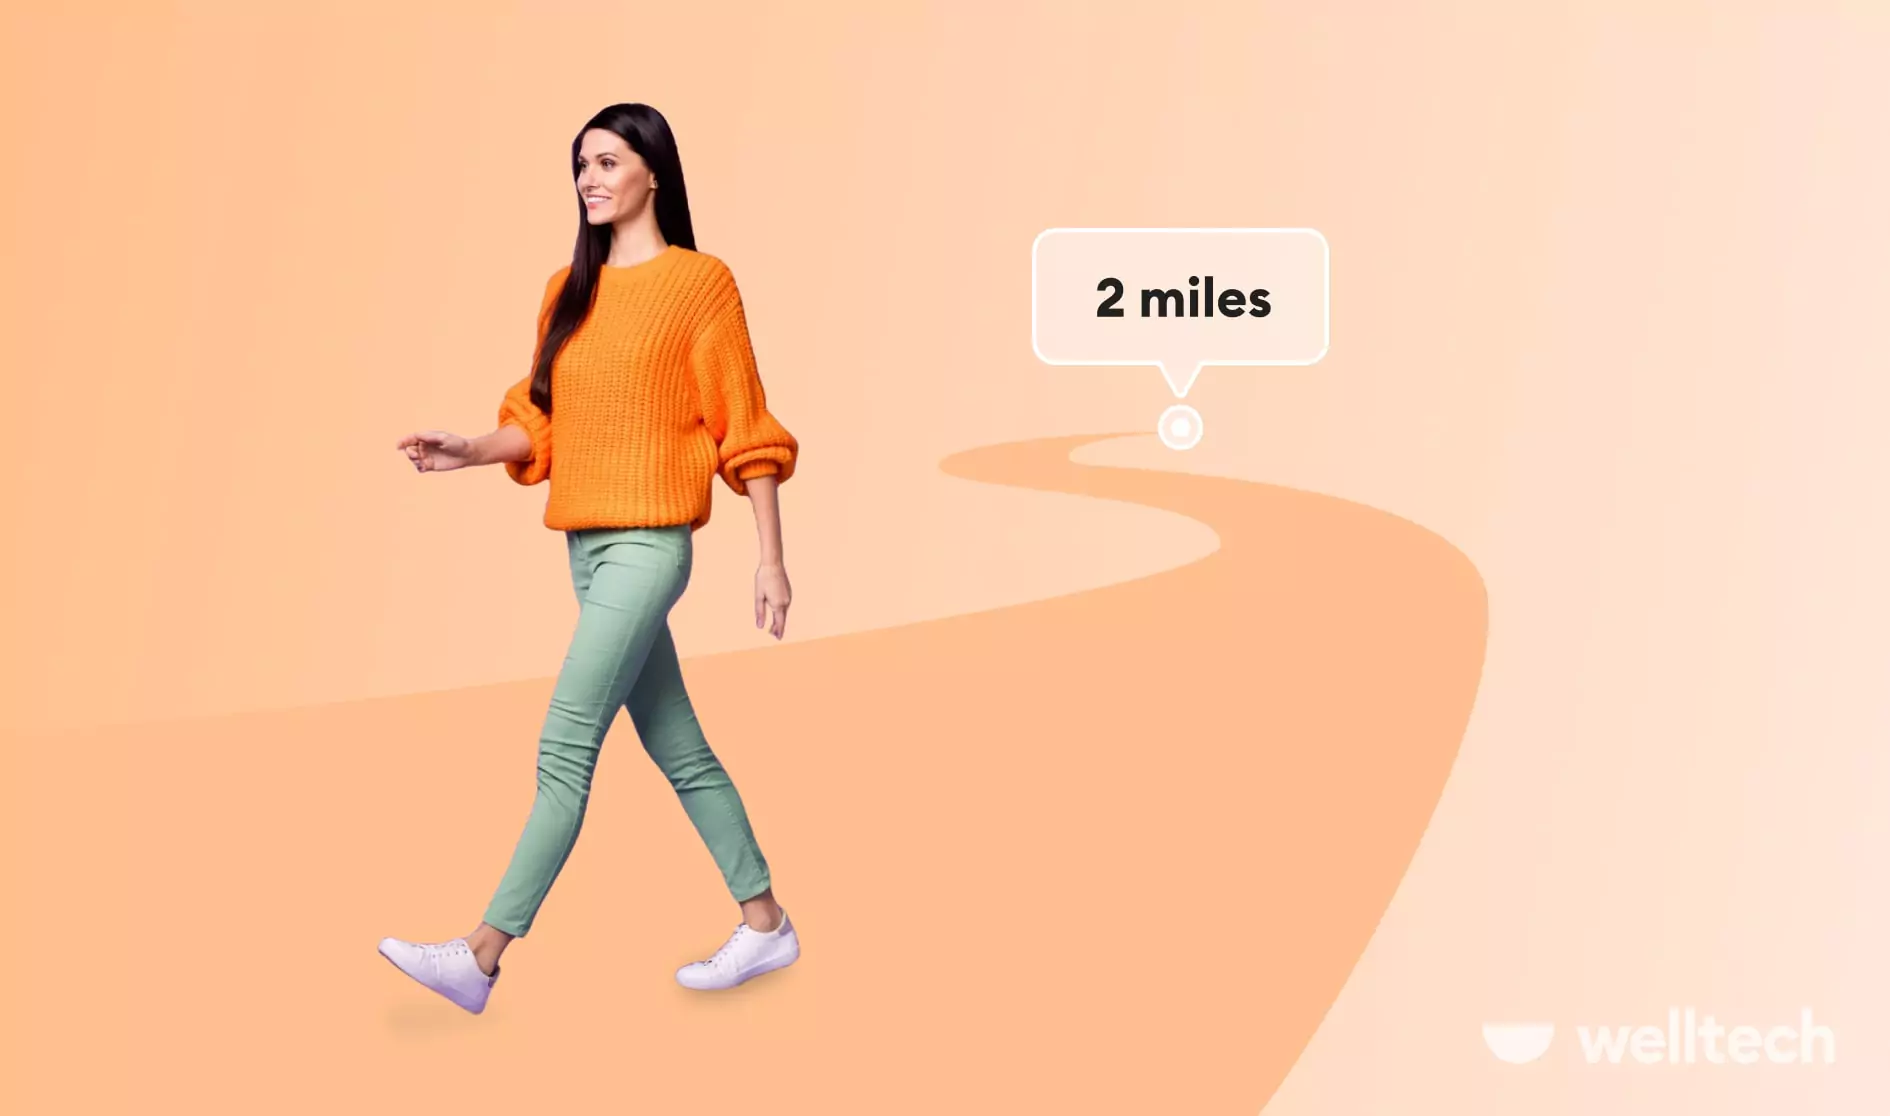 a young woman in orange sweater is casually walking, smiling, walking 2 miles a day